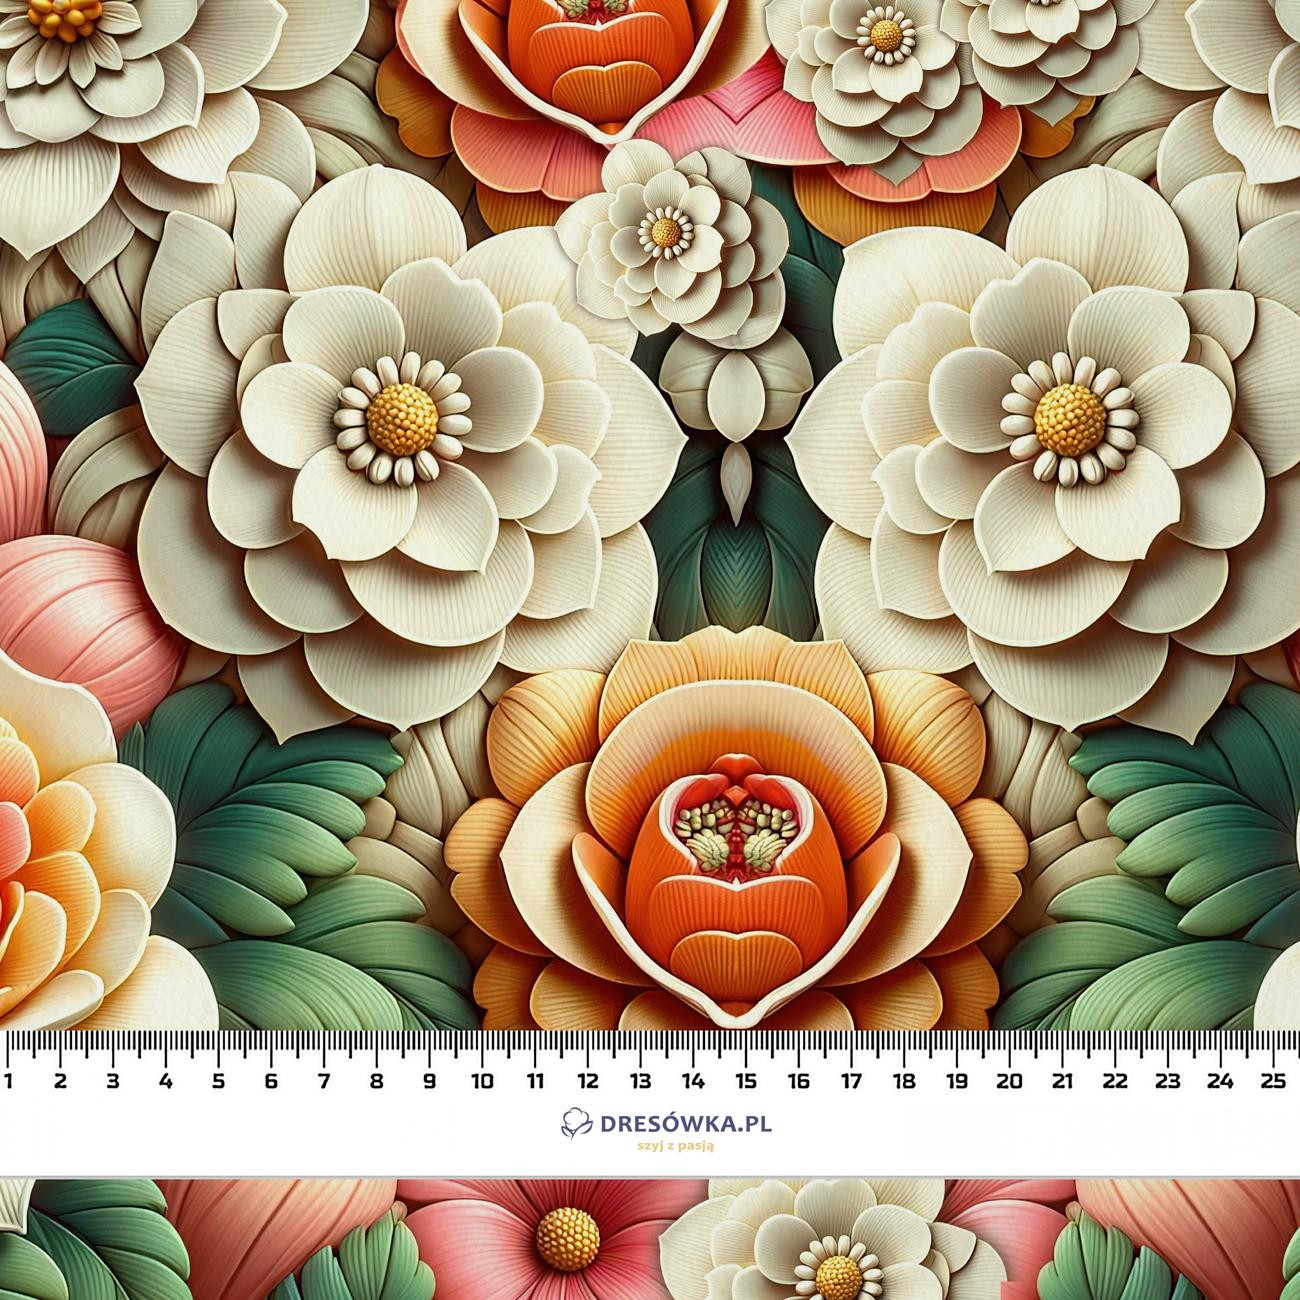 FLOWERS - Cotton woven fabric